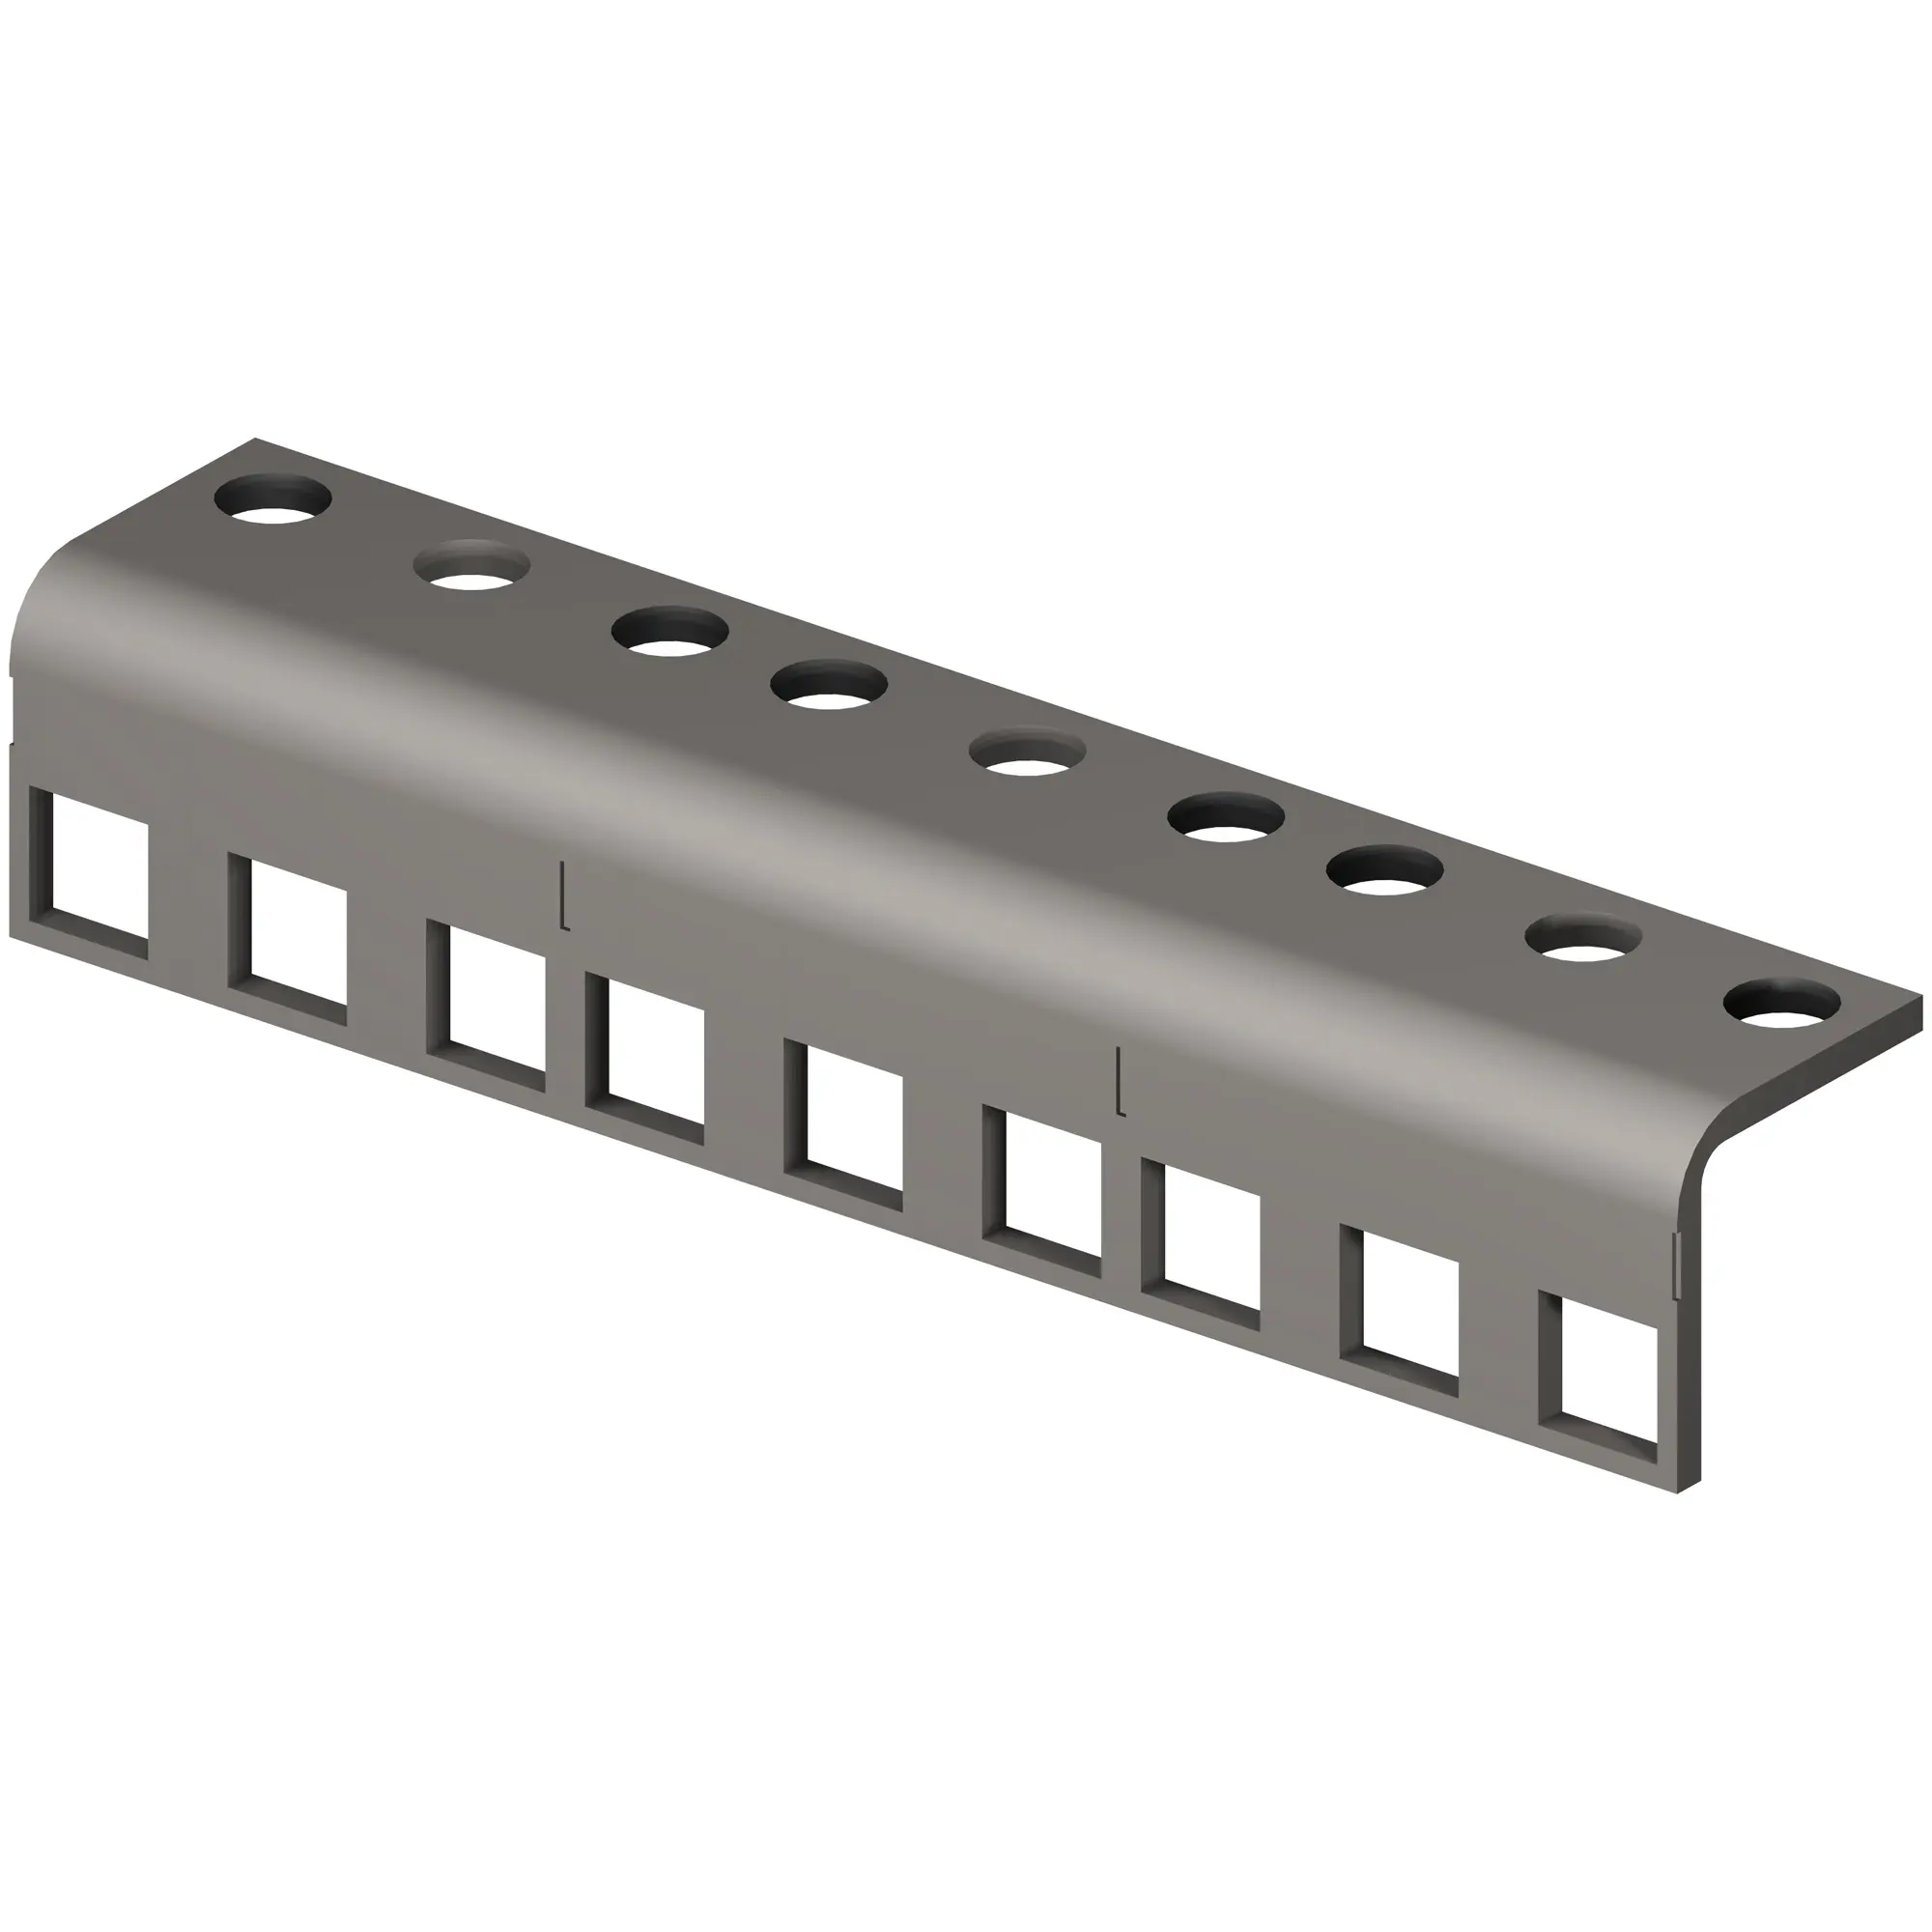 A metal bar with holes for the sides of it.